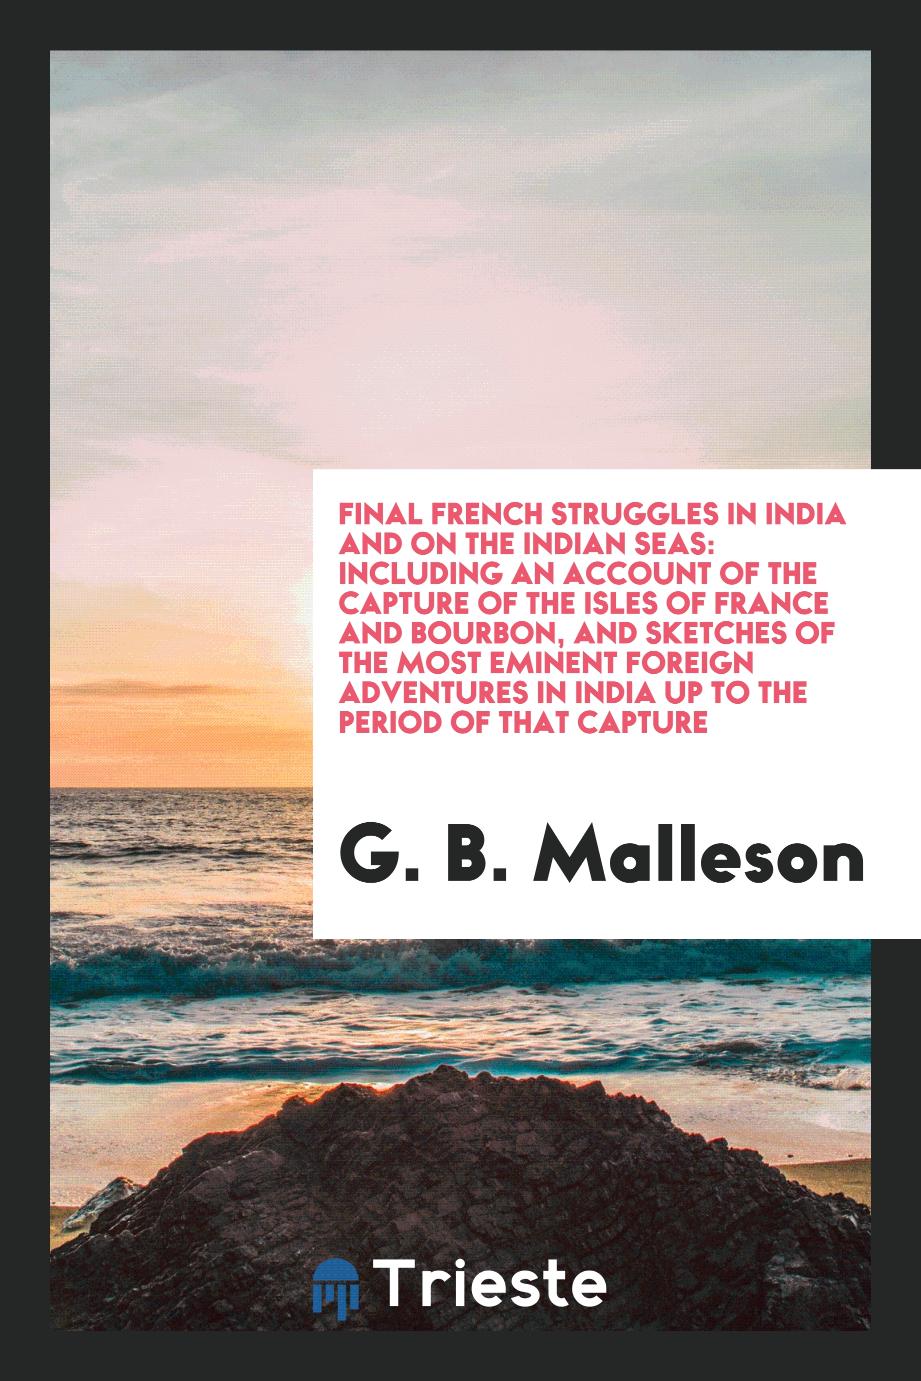 Final French Struggles in India and on the Indian Seas: Including an Account of the Capture of the Isles of France and Bourbon, and Sketches of the Most Eminent Foreign Adventures in India up to the Period of That Capture